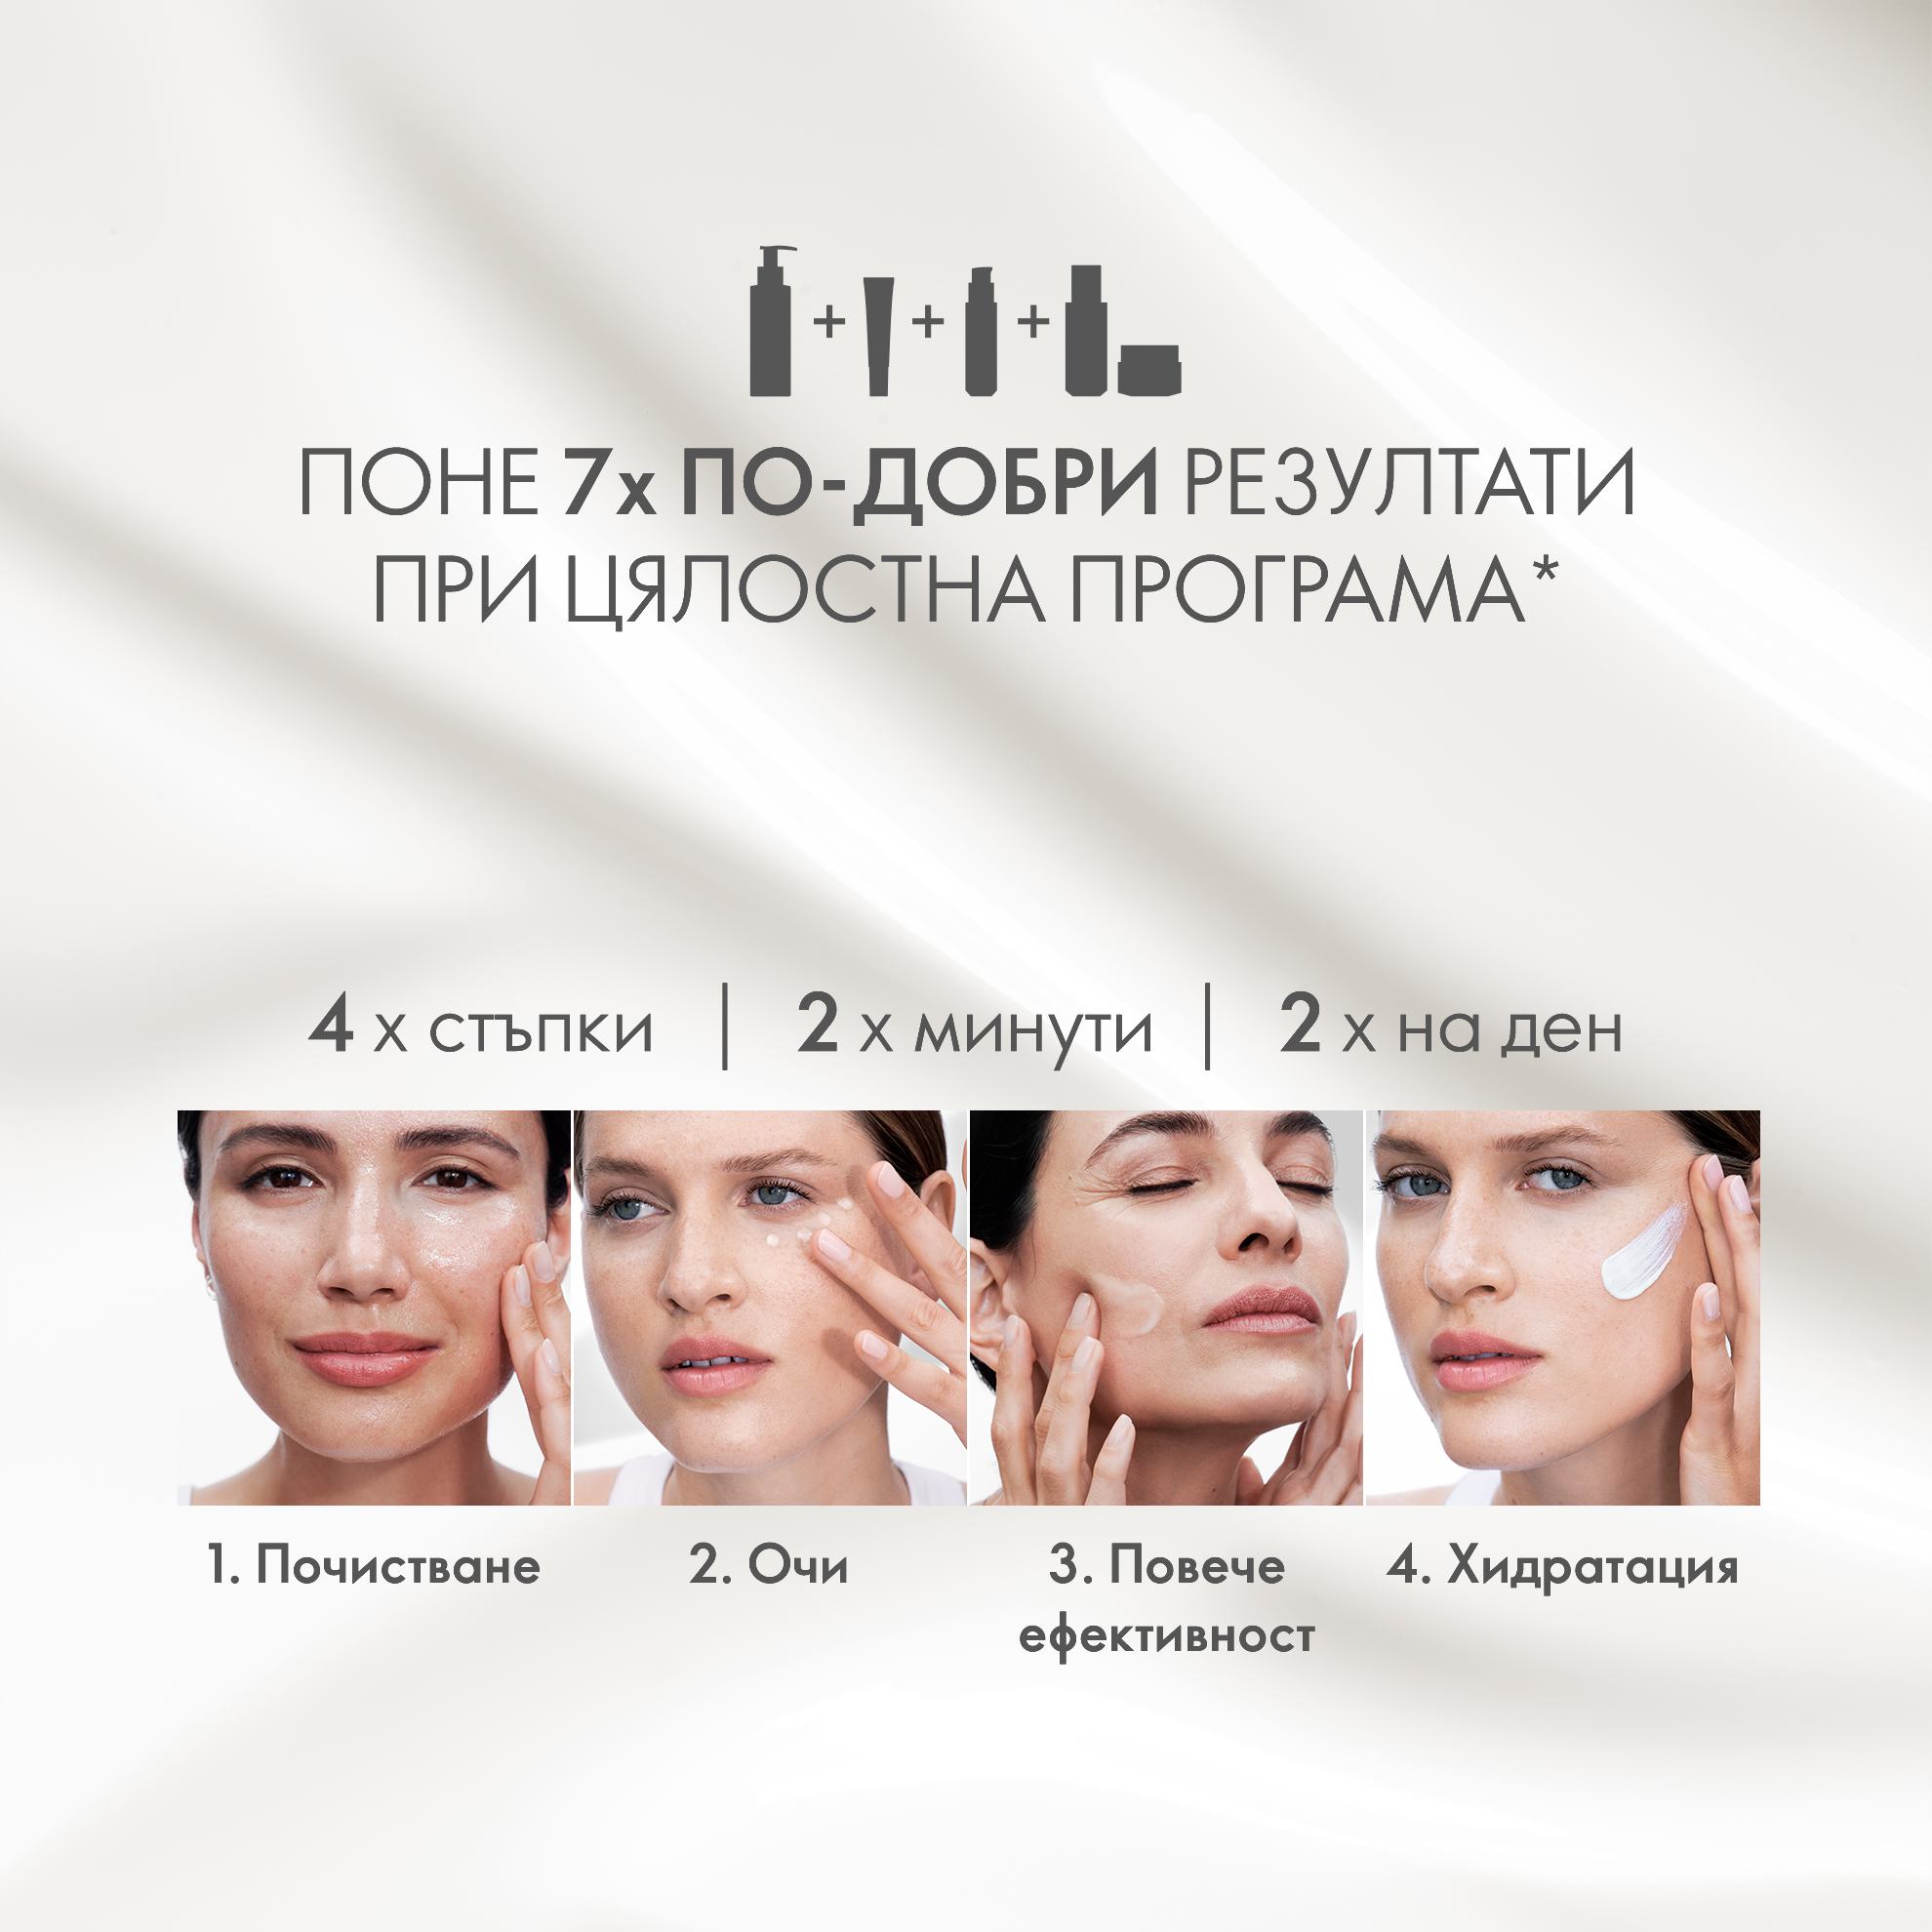 https://media-cdn.oriflame.com/productImage?externalMediaId=product-management-media%2fProducts%2f45595%2fBG%2f45595_5.png&id=17573237&version=1